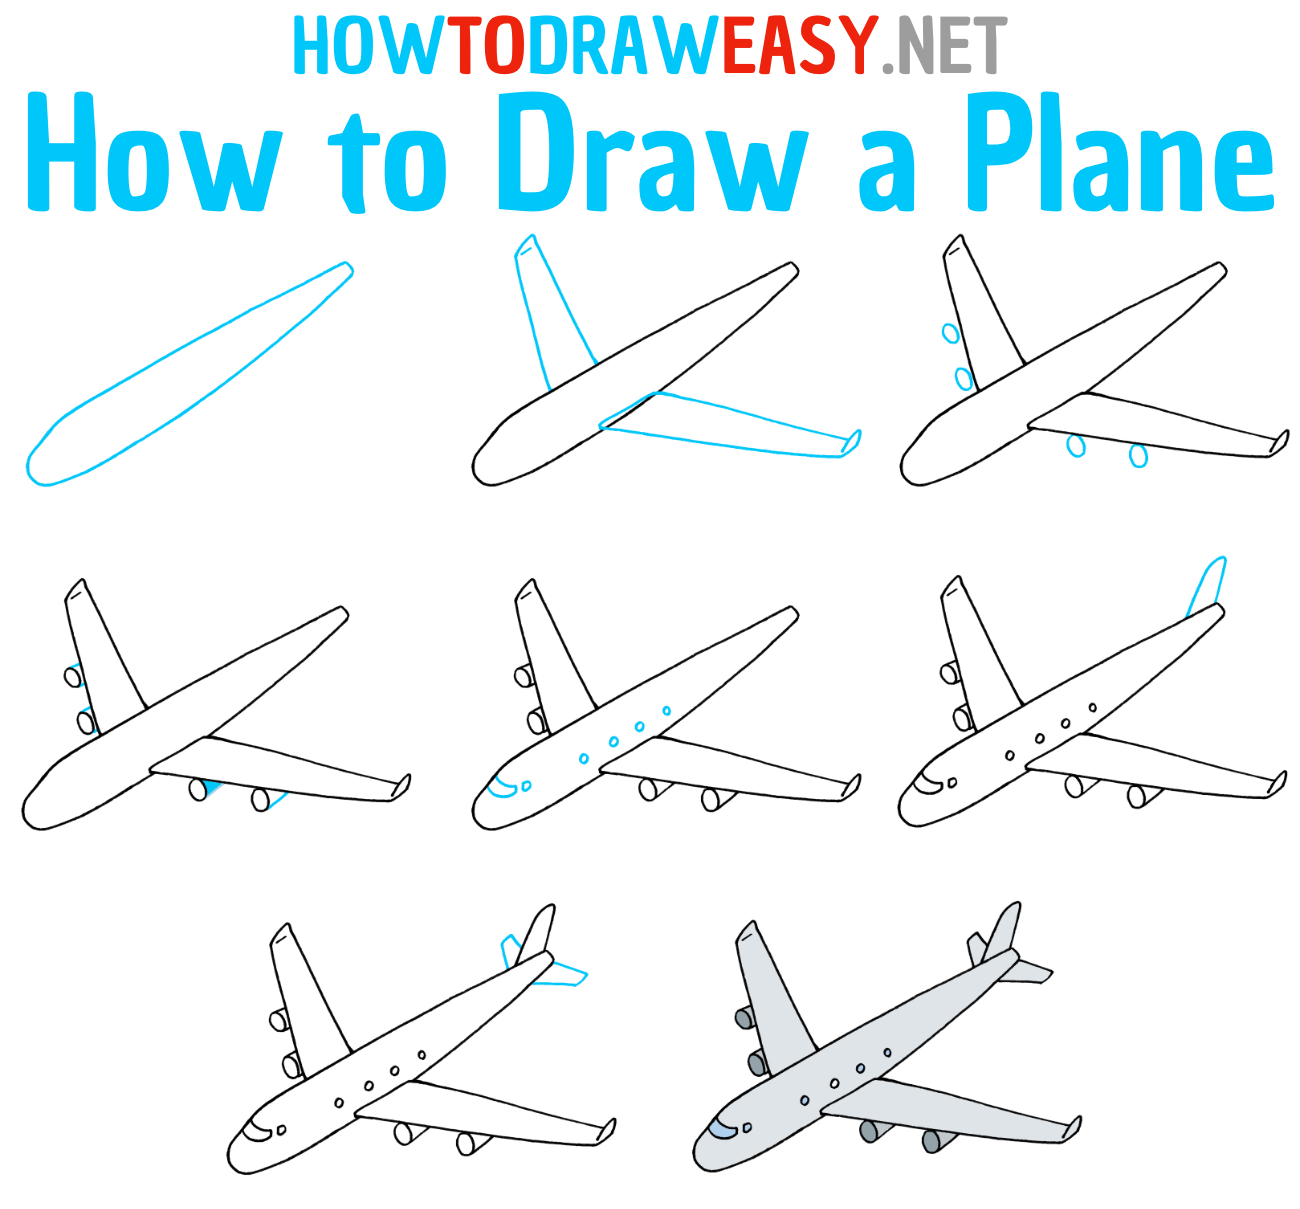 How to Draw a Plane Step by Step